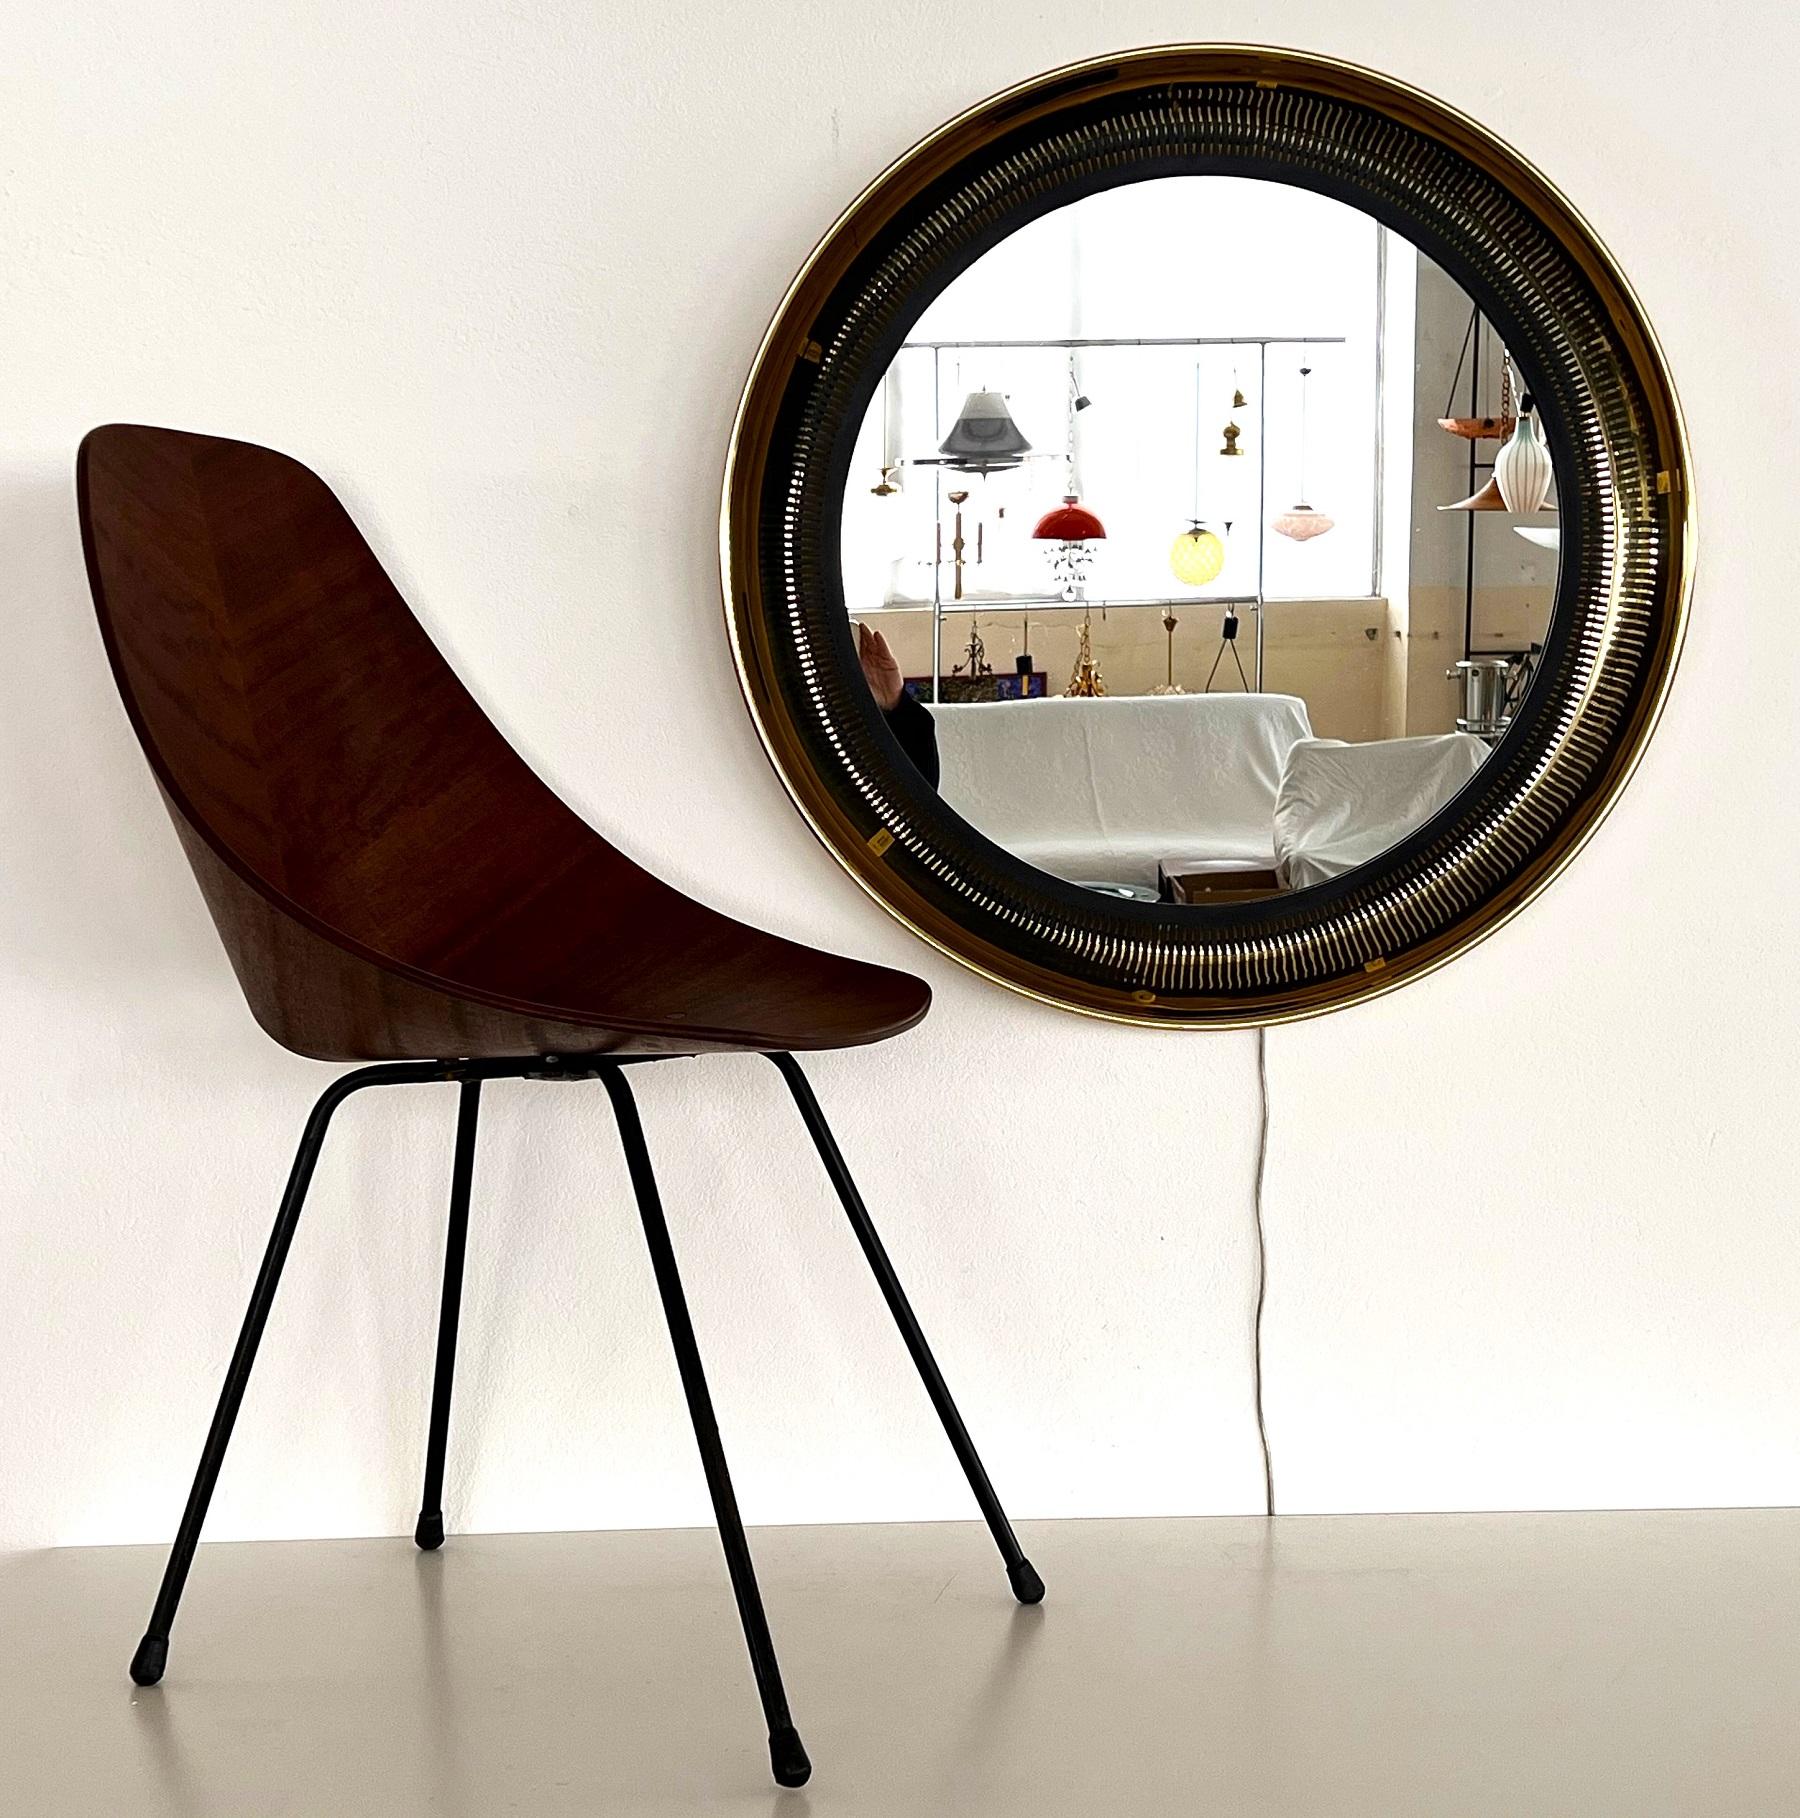 Beautiful and rare very large round wall mirror with lighting function, which is either connected directly to the circuit or used by cord.
Made in Germany during the 1970s from Vereinigte Werkstätten München of extremely high quality.
The mirror has